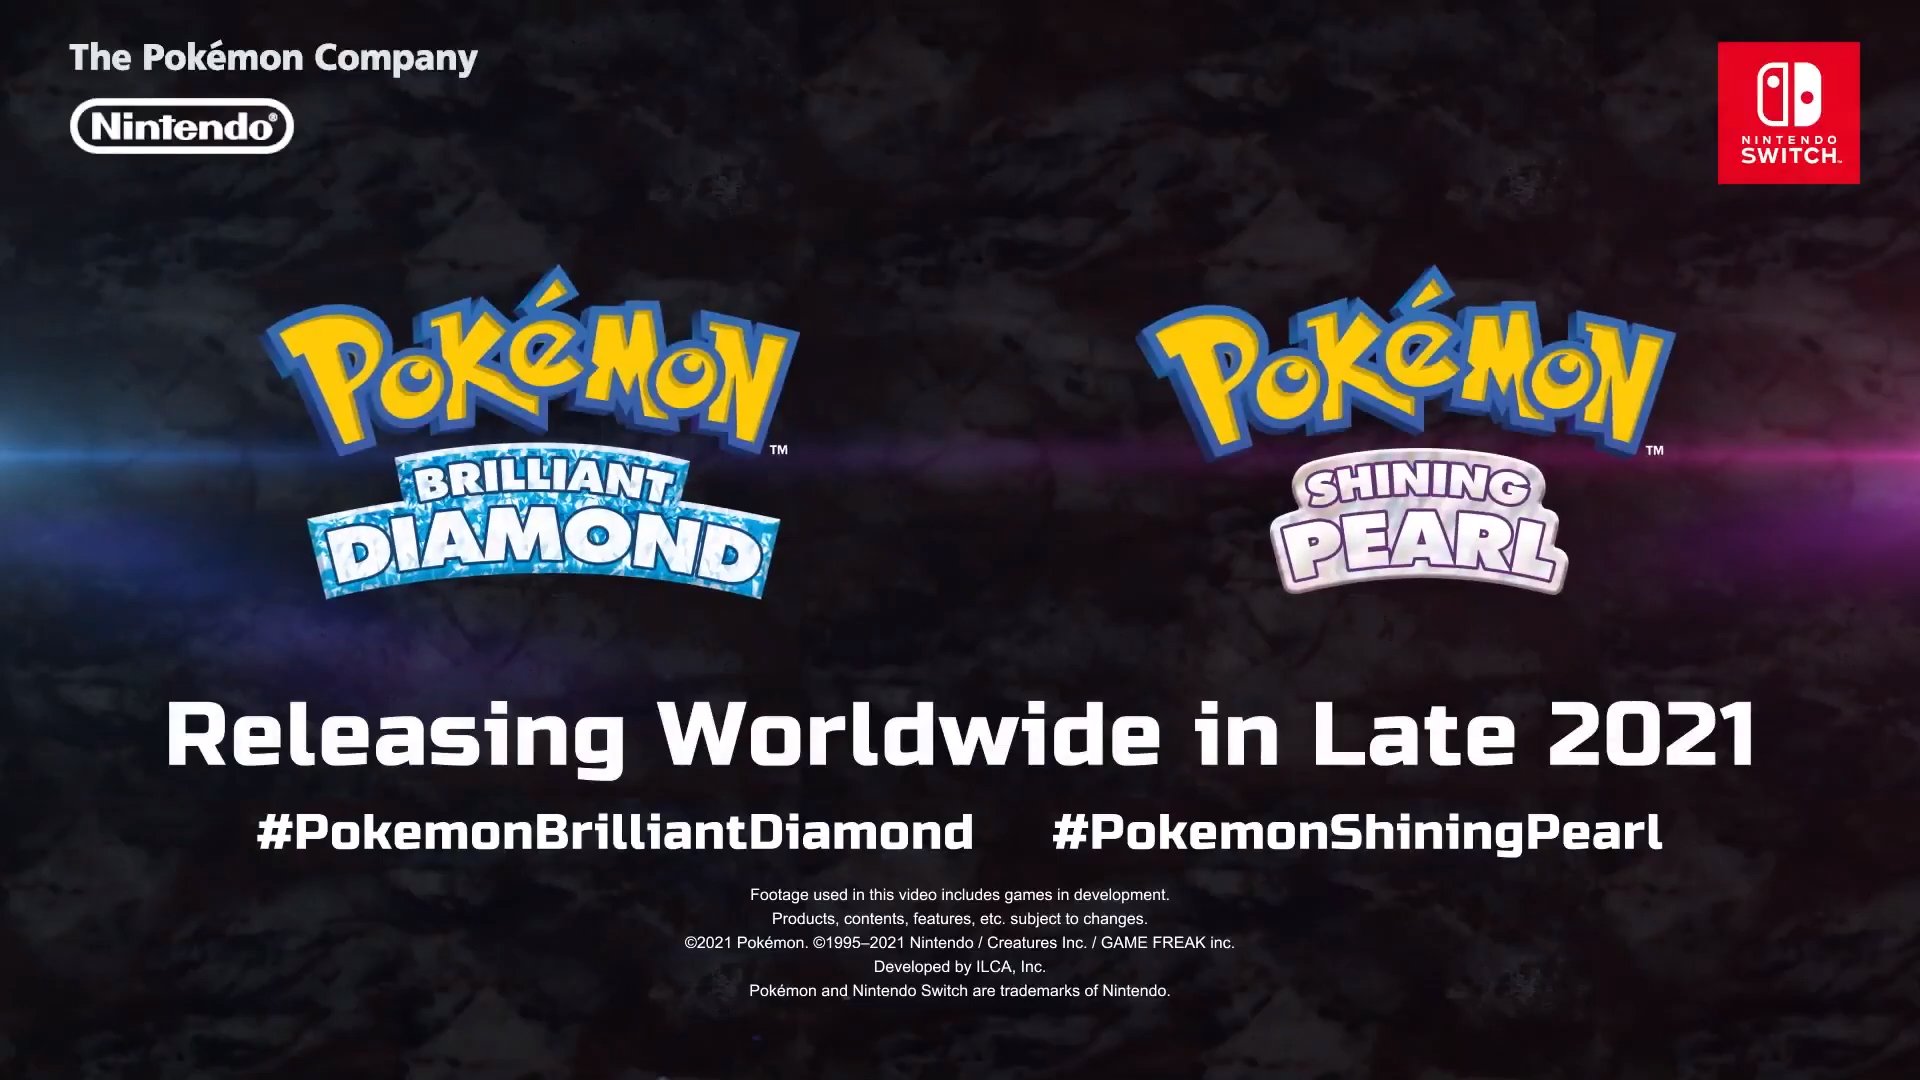 Fandom On Twitter Pokemon Diamond And Pearl Remake Announced For Switch Coming Late 2021 Pokemonpresents Pokemon25 - how to switch pokemon in pokemon honorio roblox